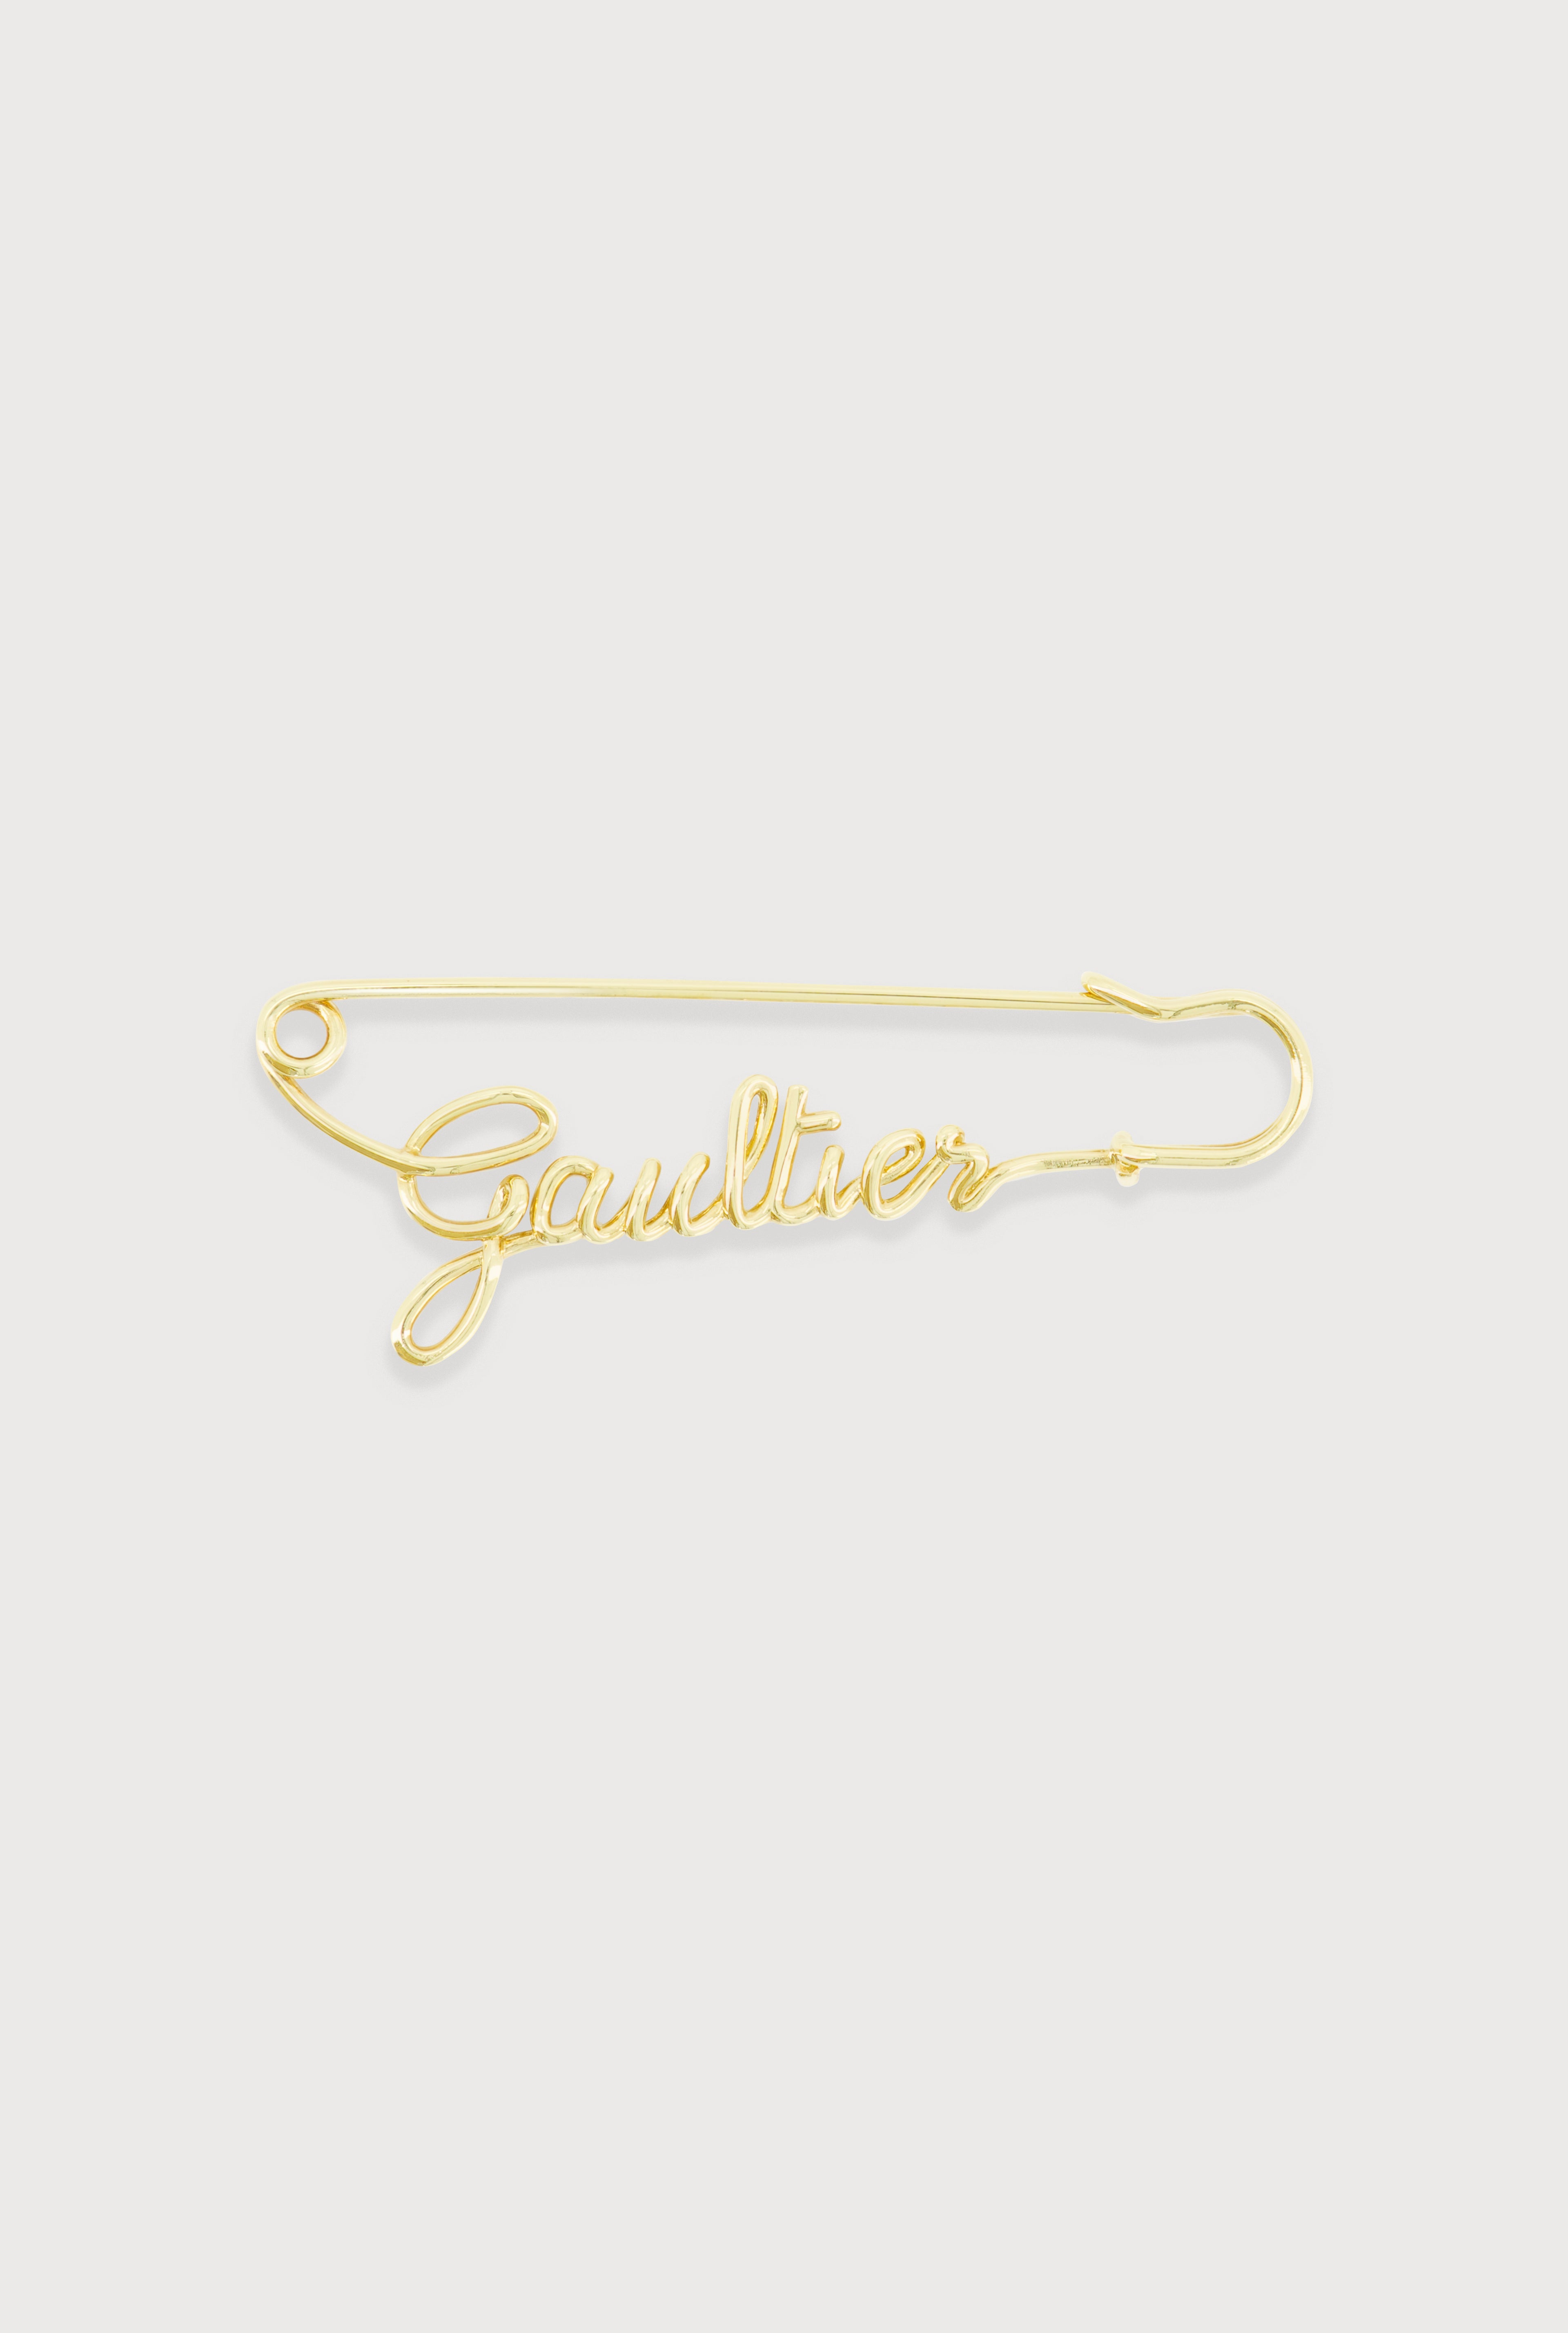 The Gold-Tone Gaultier Safety Pin